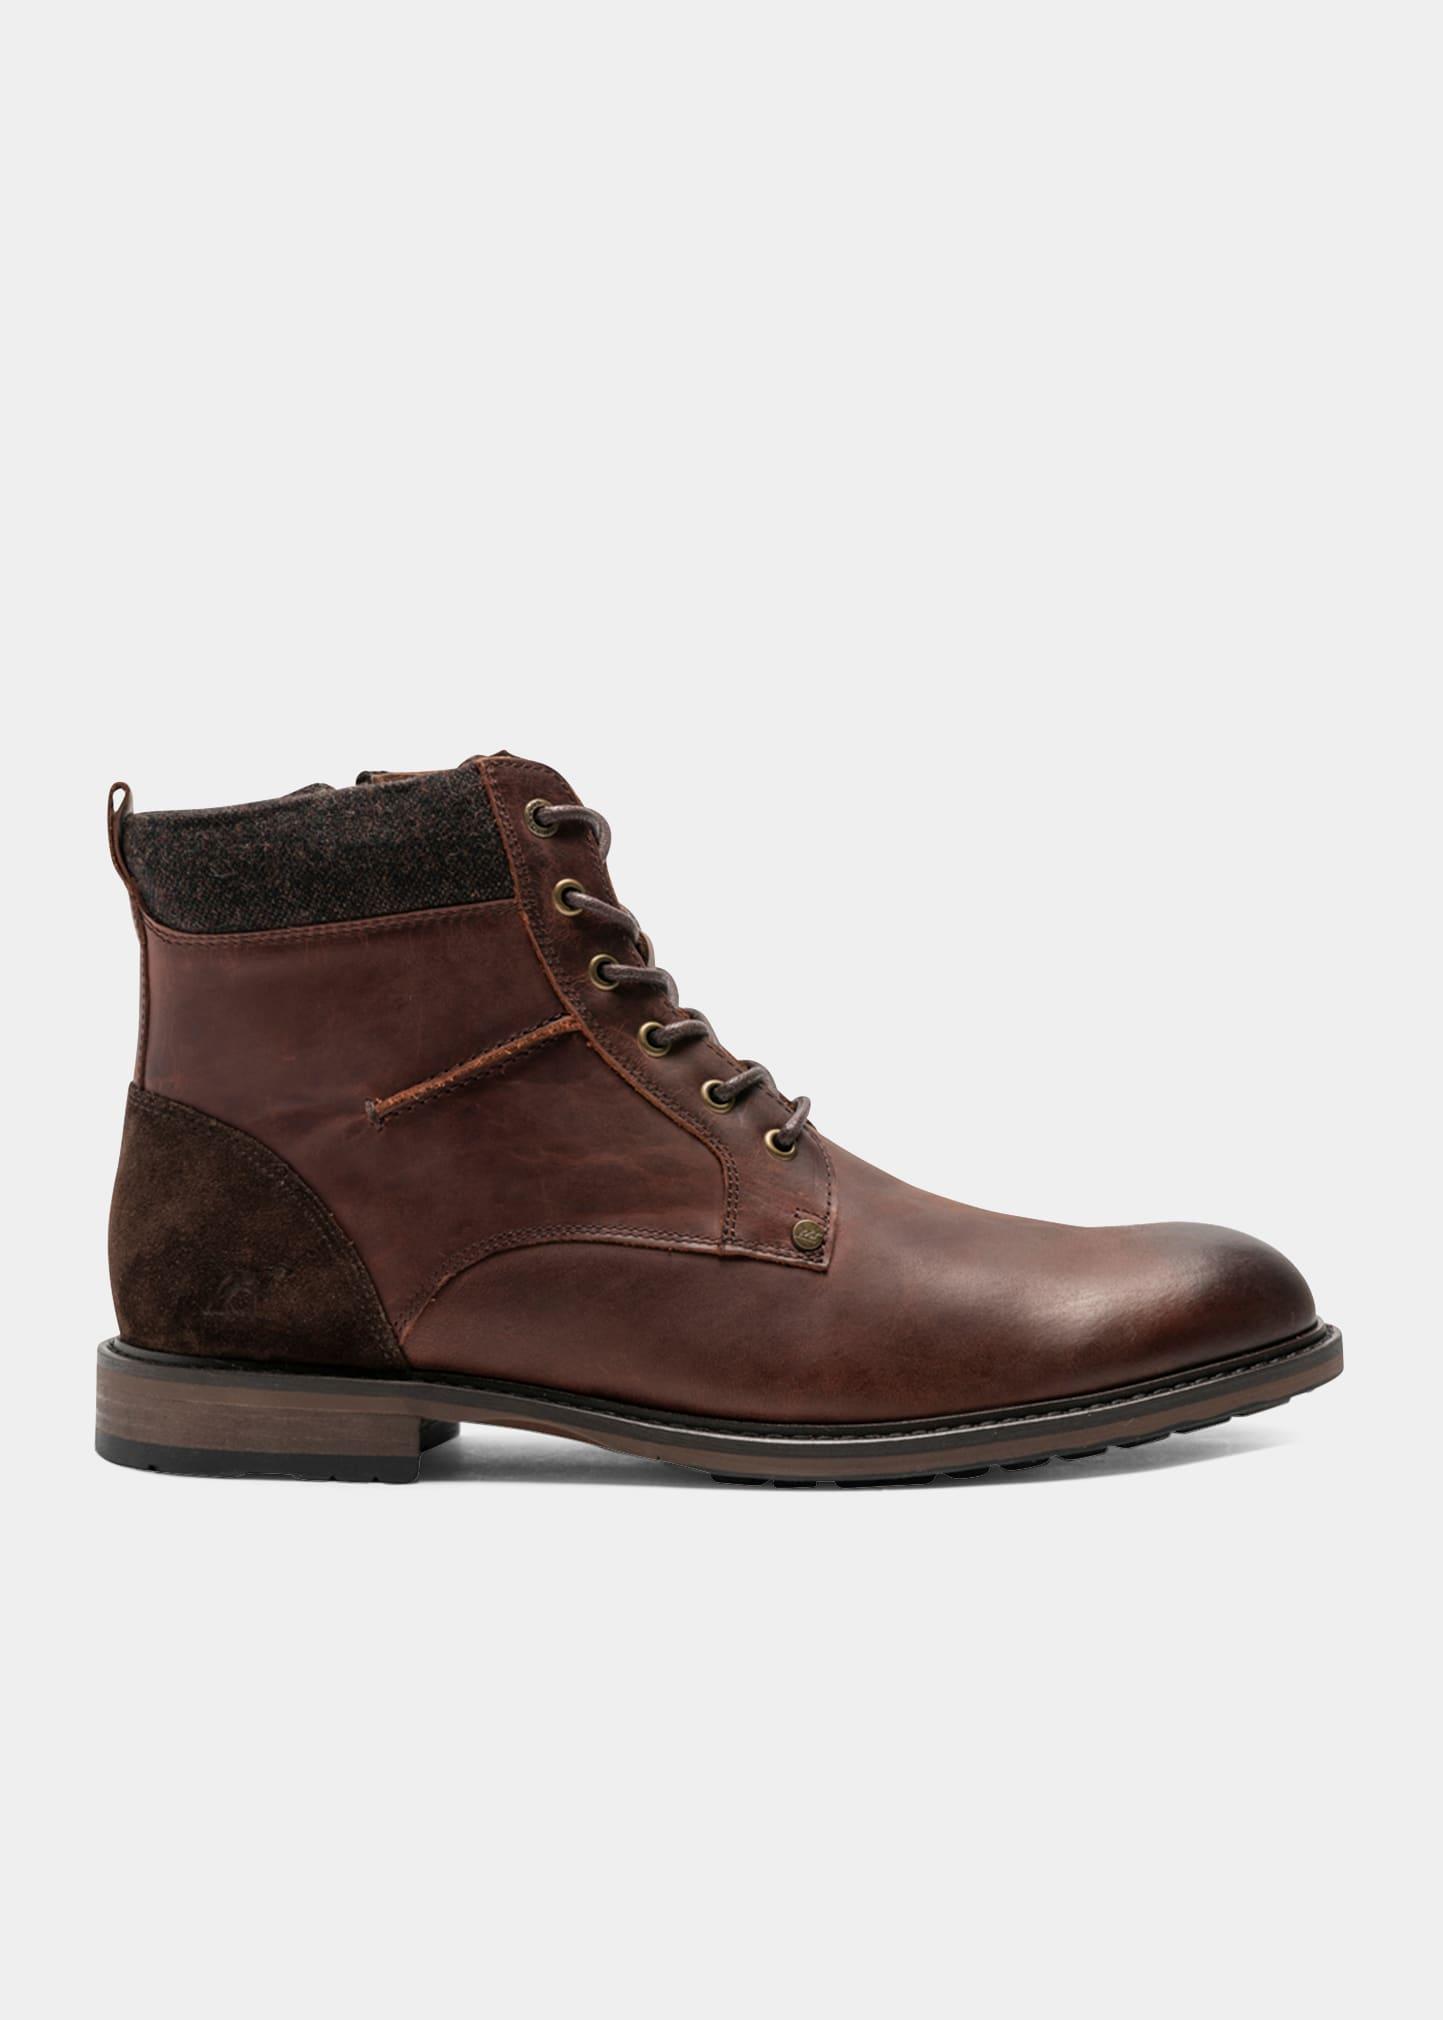 Rodd & Gunn Duntroon Leather Military Boots in Brown for Men | Lyst